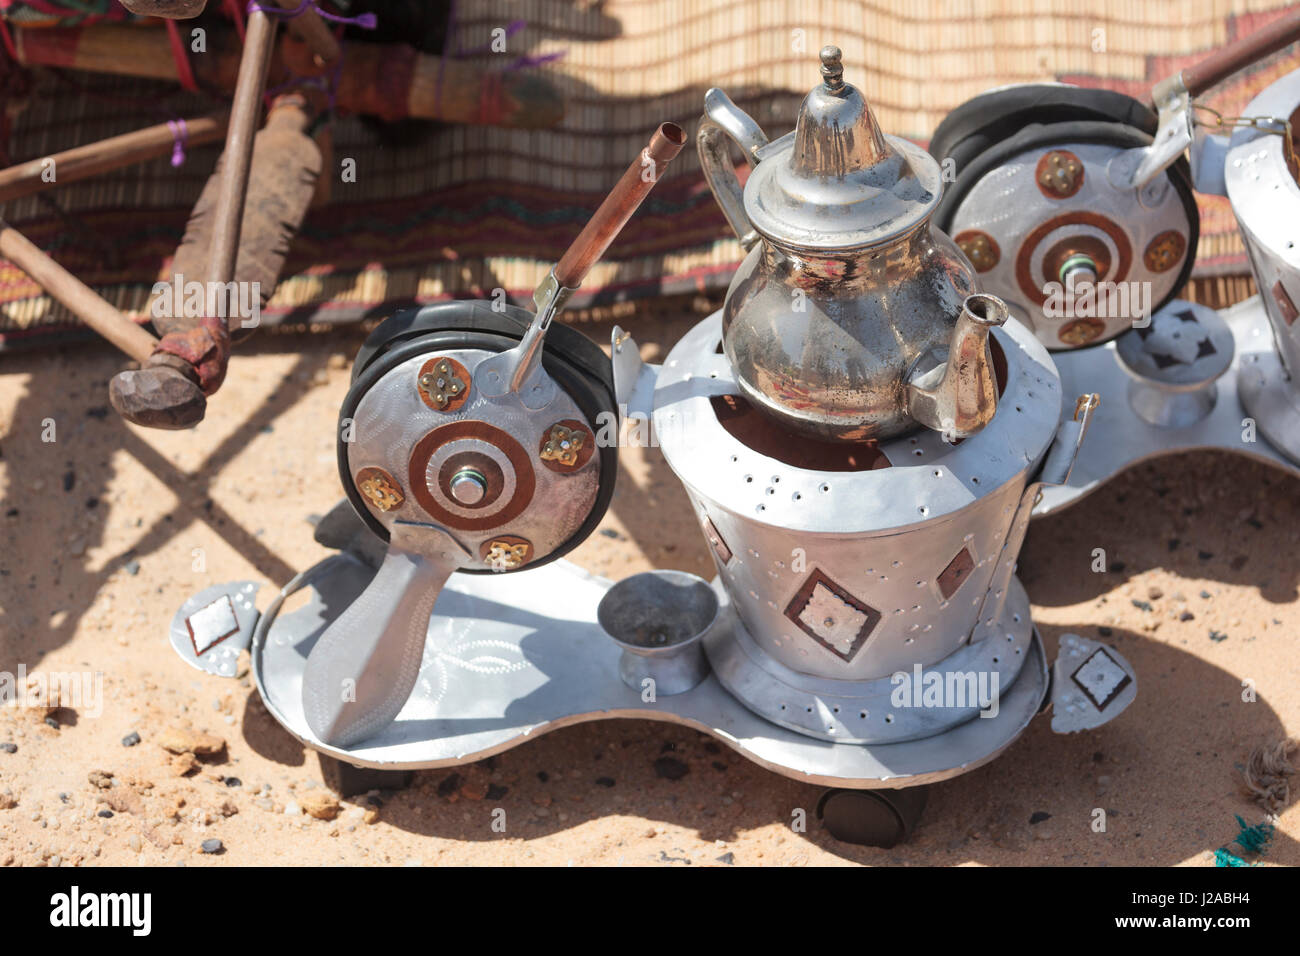 Africa, Western Sahara, Dakhla. An integrated kettle and boiler, sitting in the sand between uses. Stock Photo